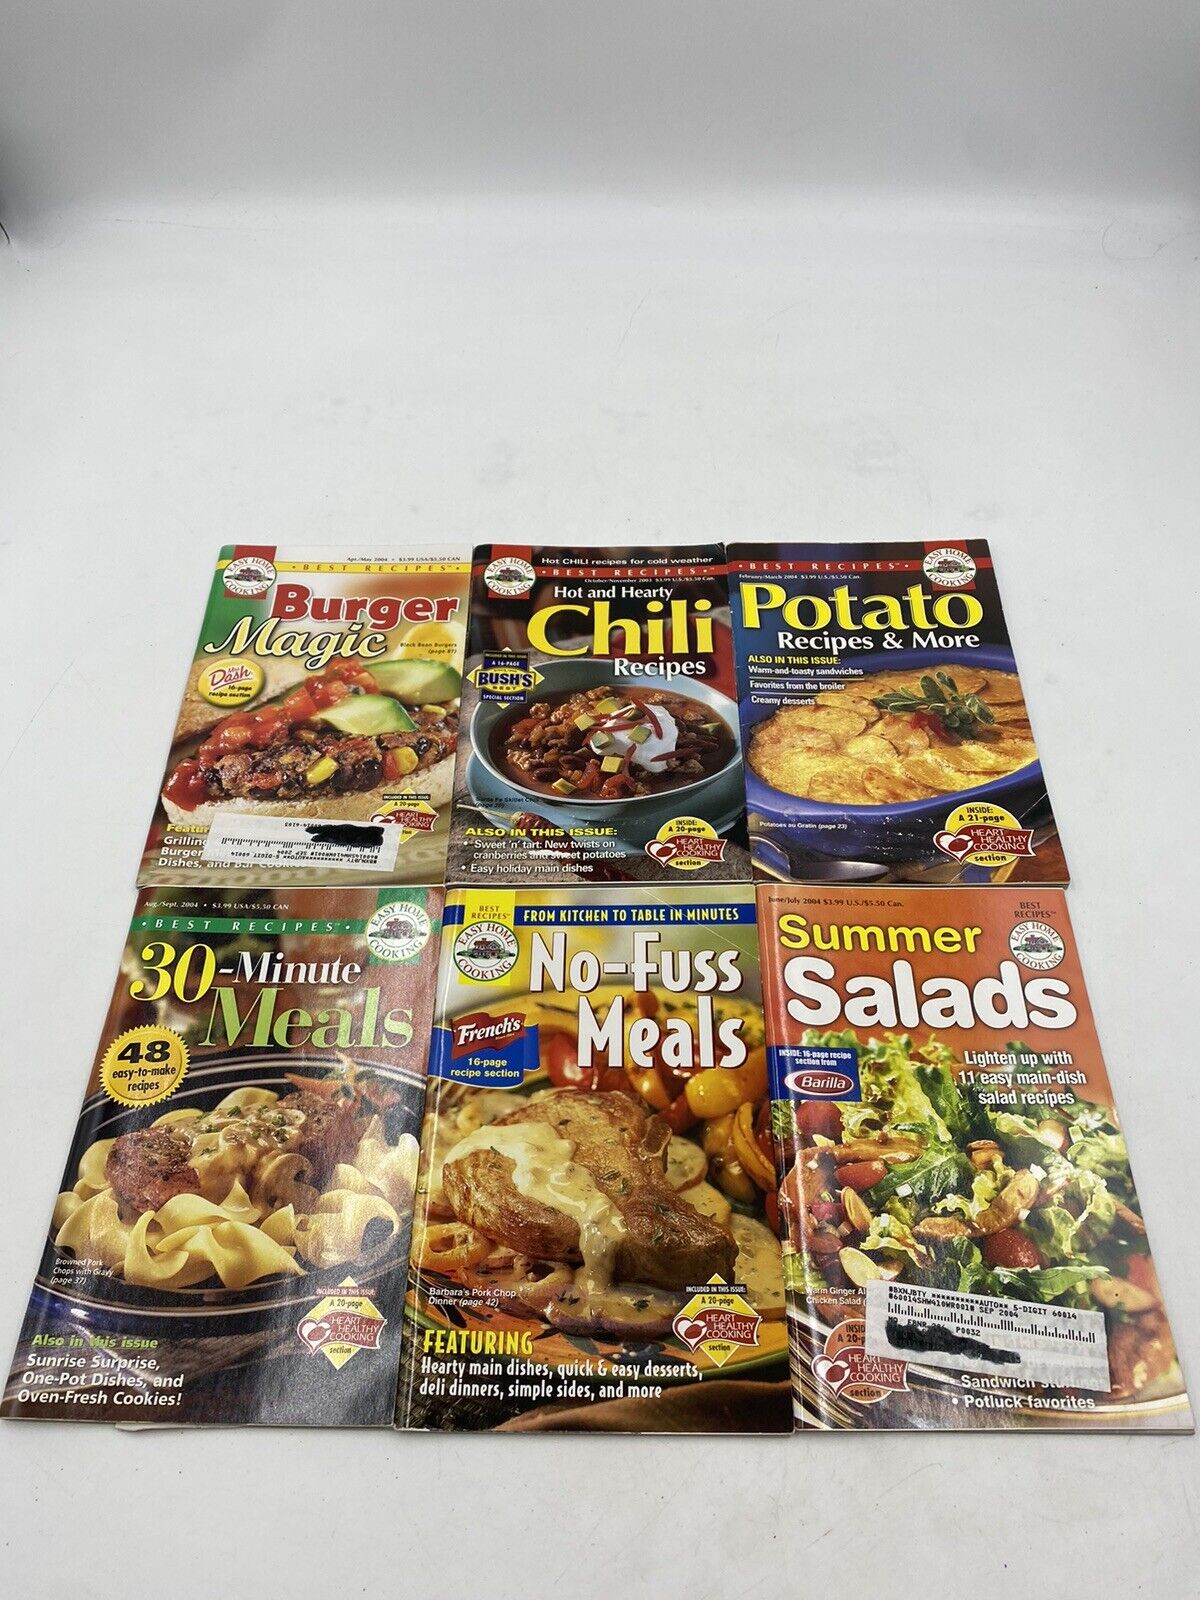 Easy Home Cooking, Best Recipes Magazine Booklets Collection, Delicious Lot of 6